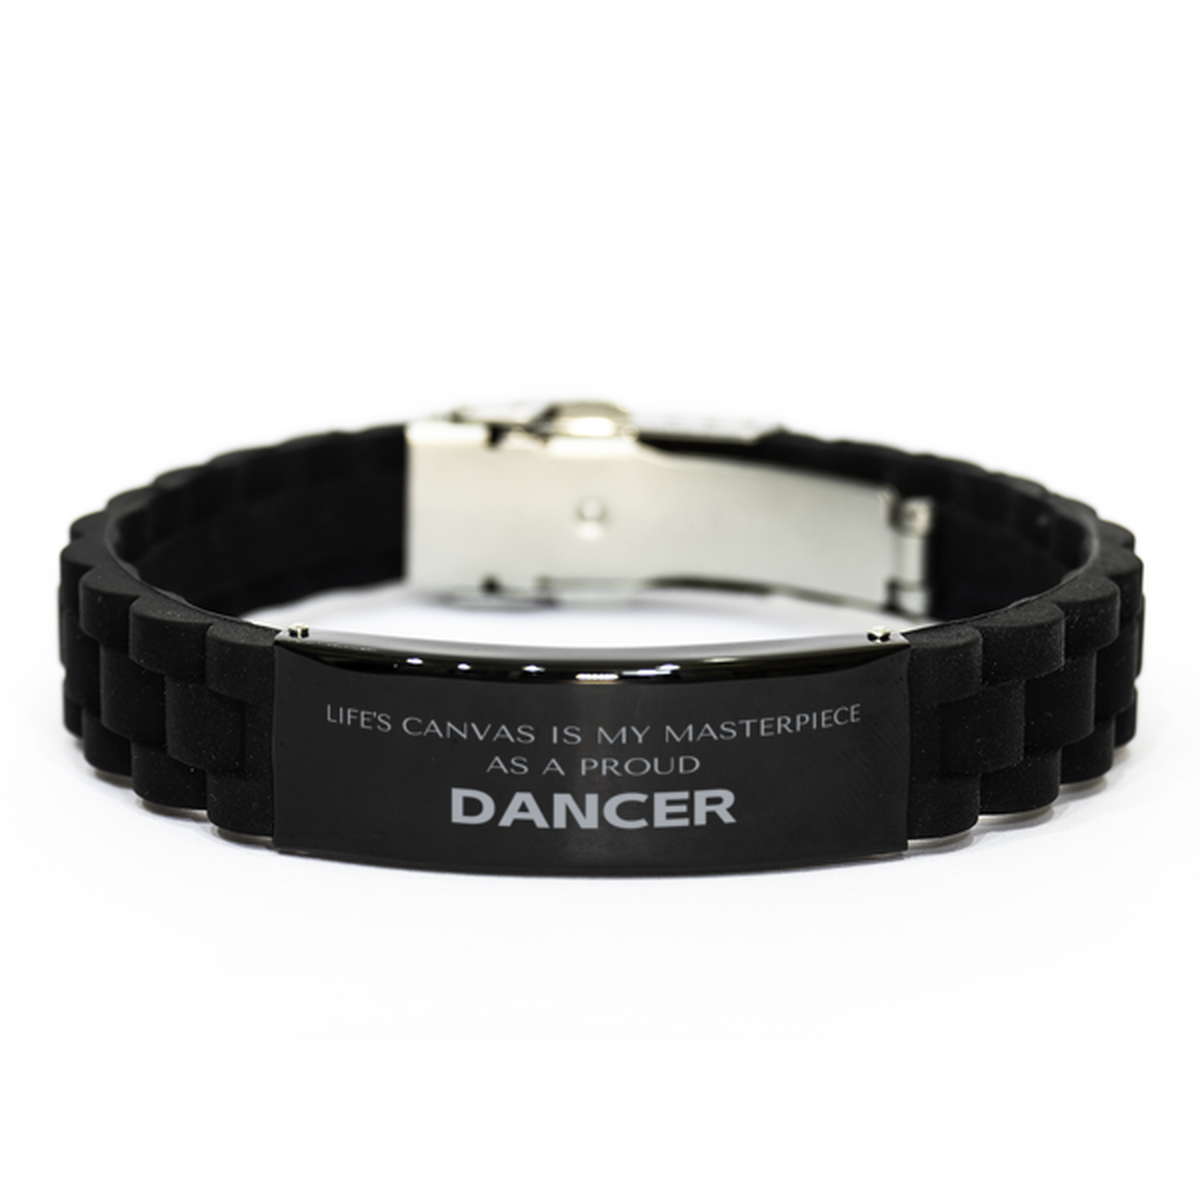 Proud Dancer Gifts, Life's canvas is my masterpiece, Epic Birthday Christmas Unique Black Glidelock Clasp Bracelet For Dancer, Coworkers, Men, Women, Friends